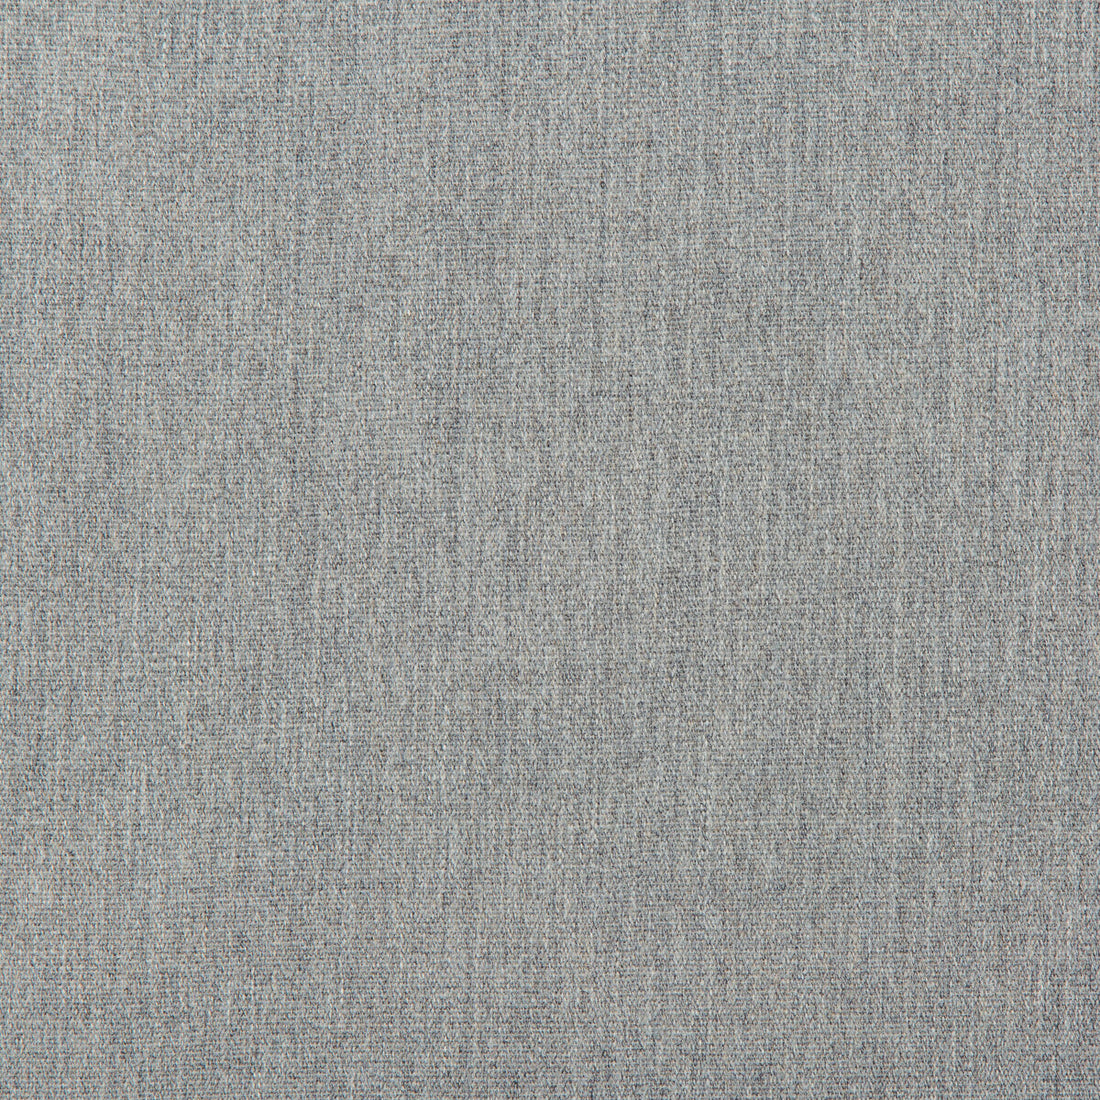 Kravet Basics fabric in 36830-52 color - pattern 36830.52.0 - by Kravet Basics in the Indoor / Outdoor collection